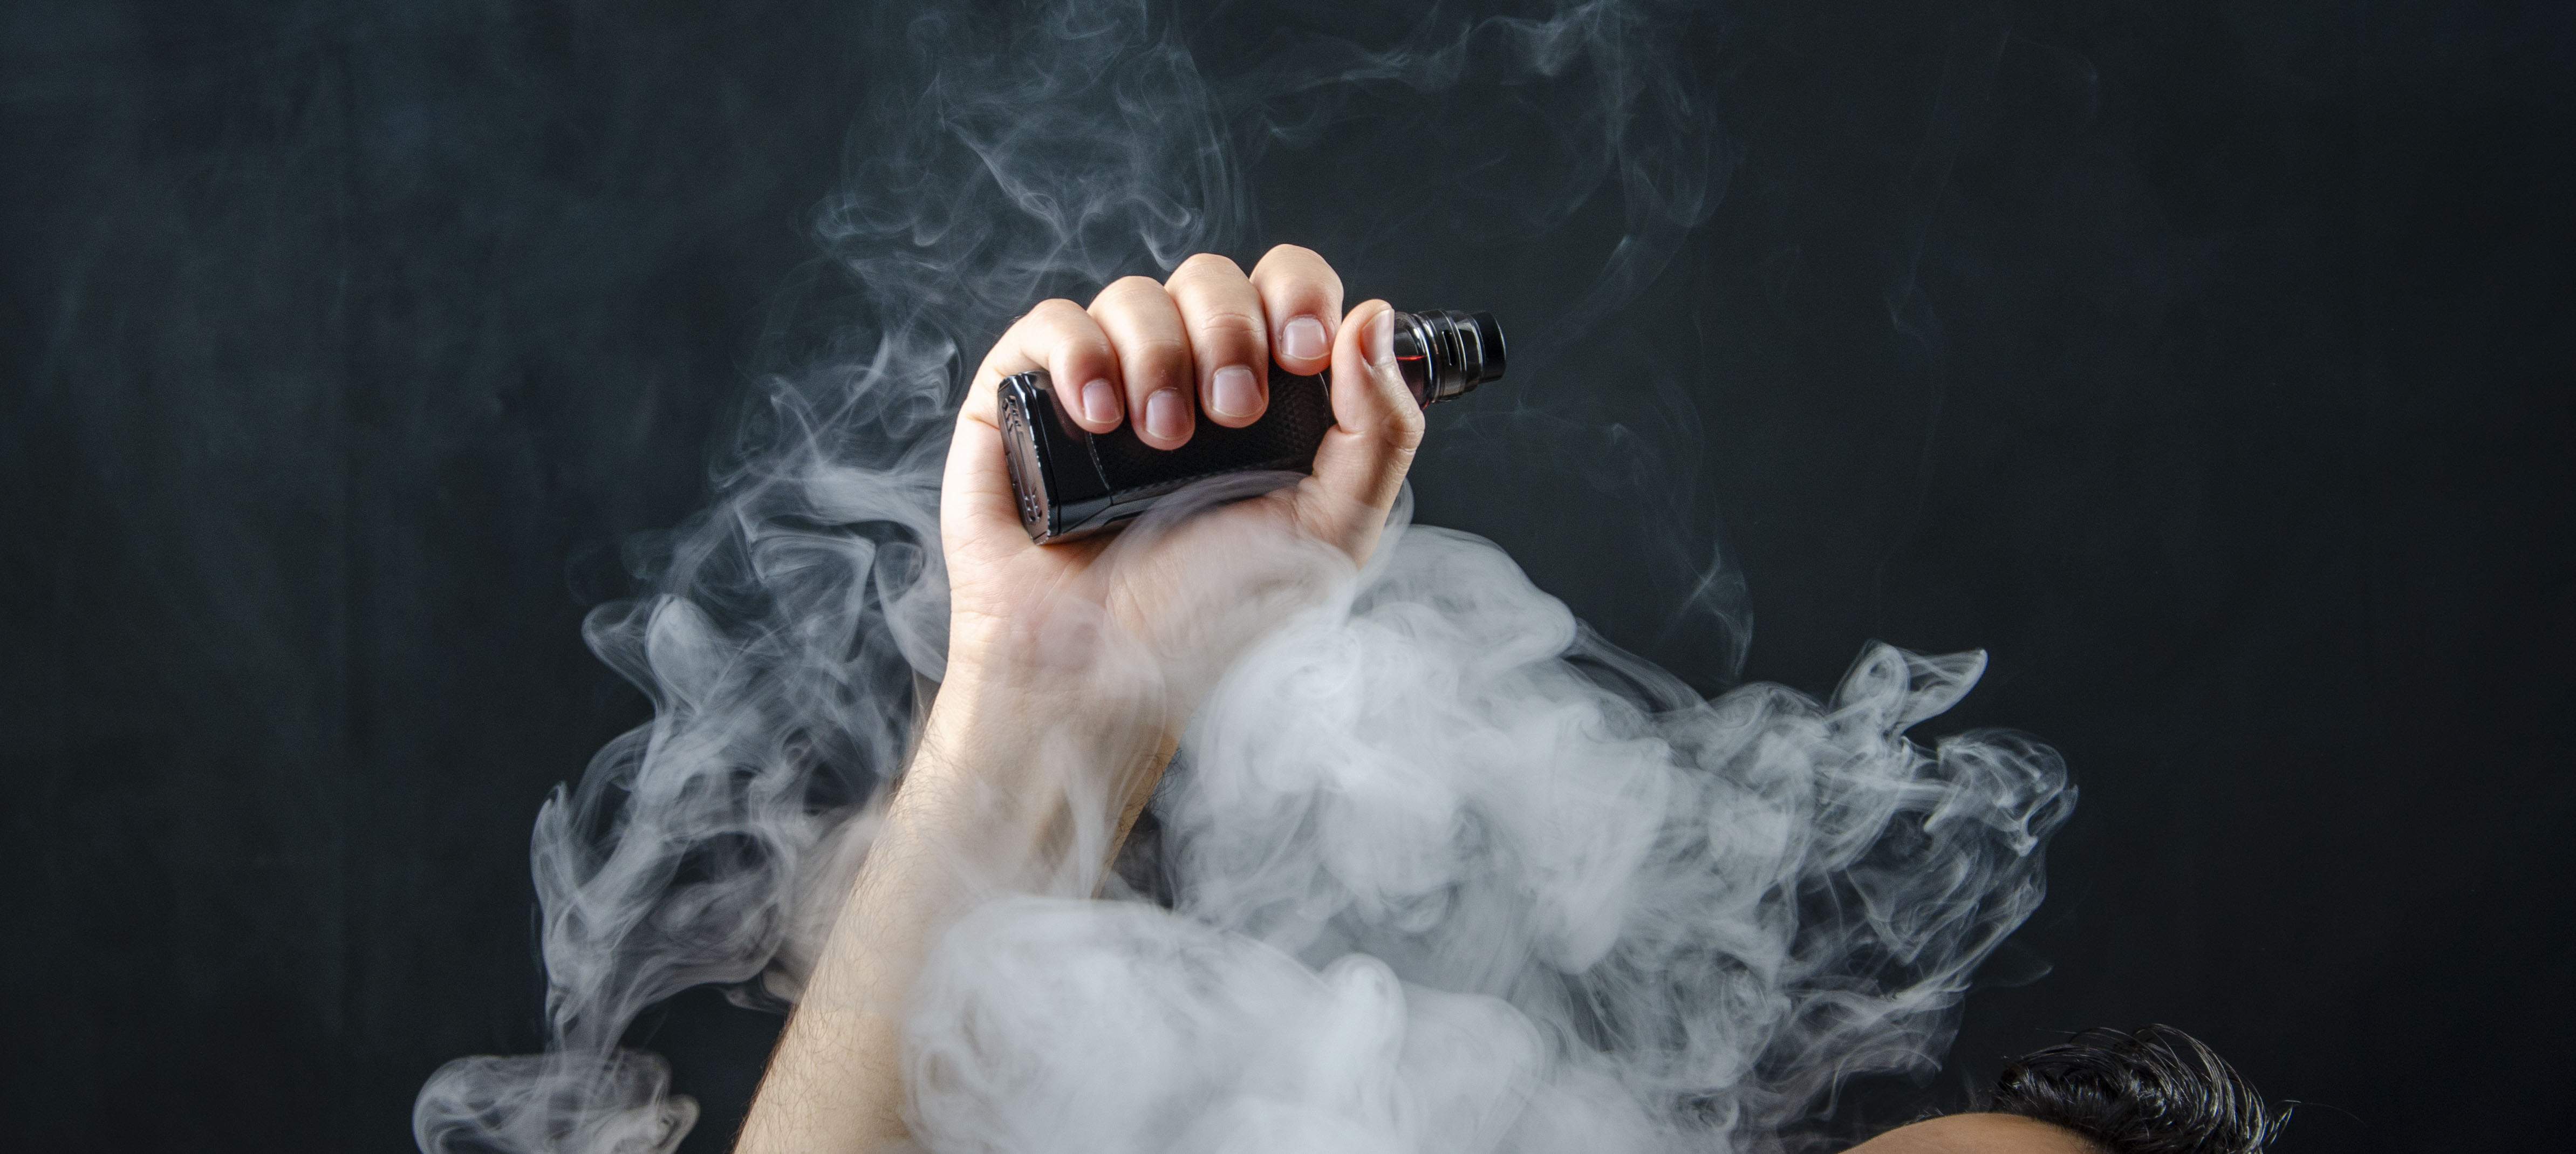 vape-in-hand-and-cloud.jpeg